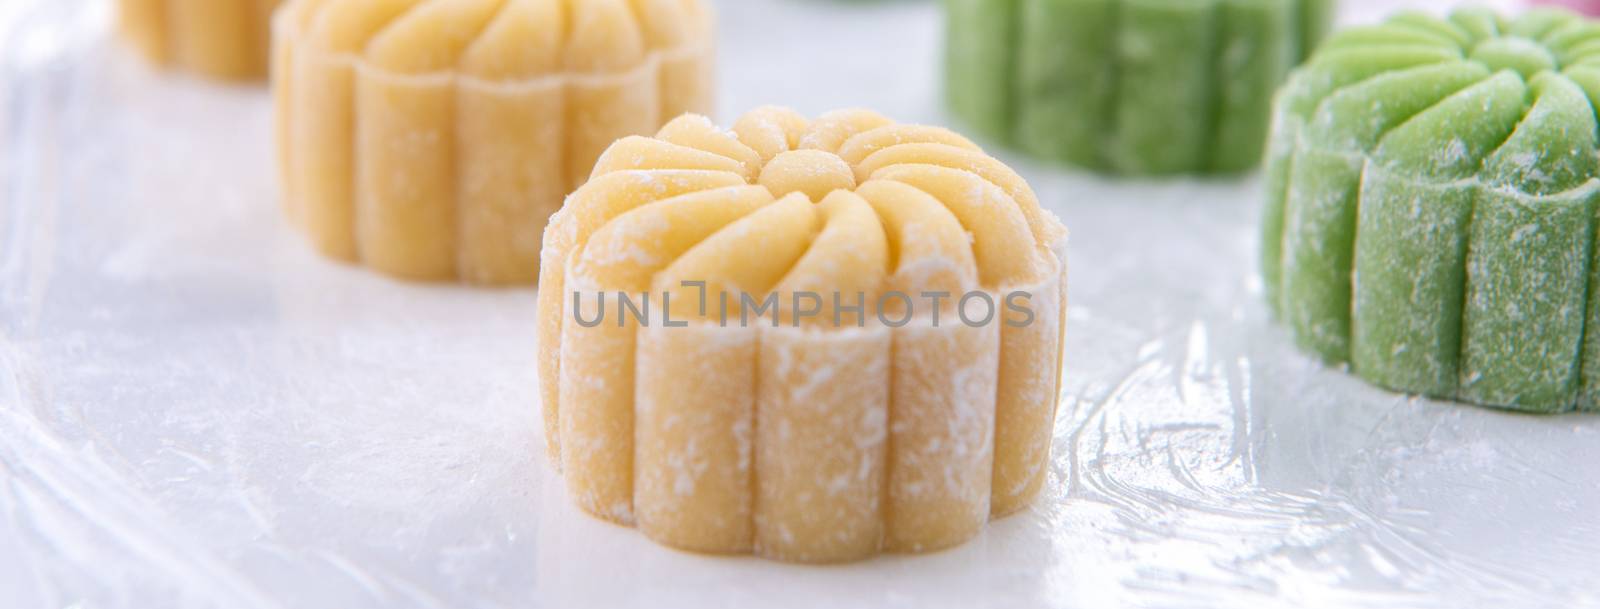 Young woman is making colorful snow skin moon cake, recipe of sweet snowy mooncake, traditional savory dessert for Mid-Autumn Festival, close up, lifestyle.